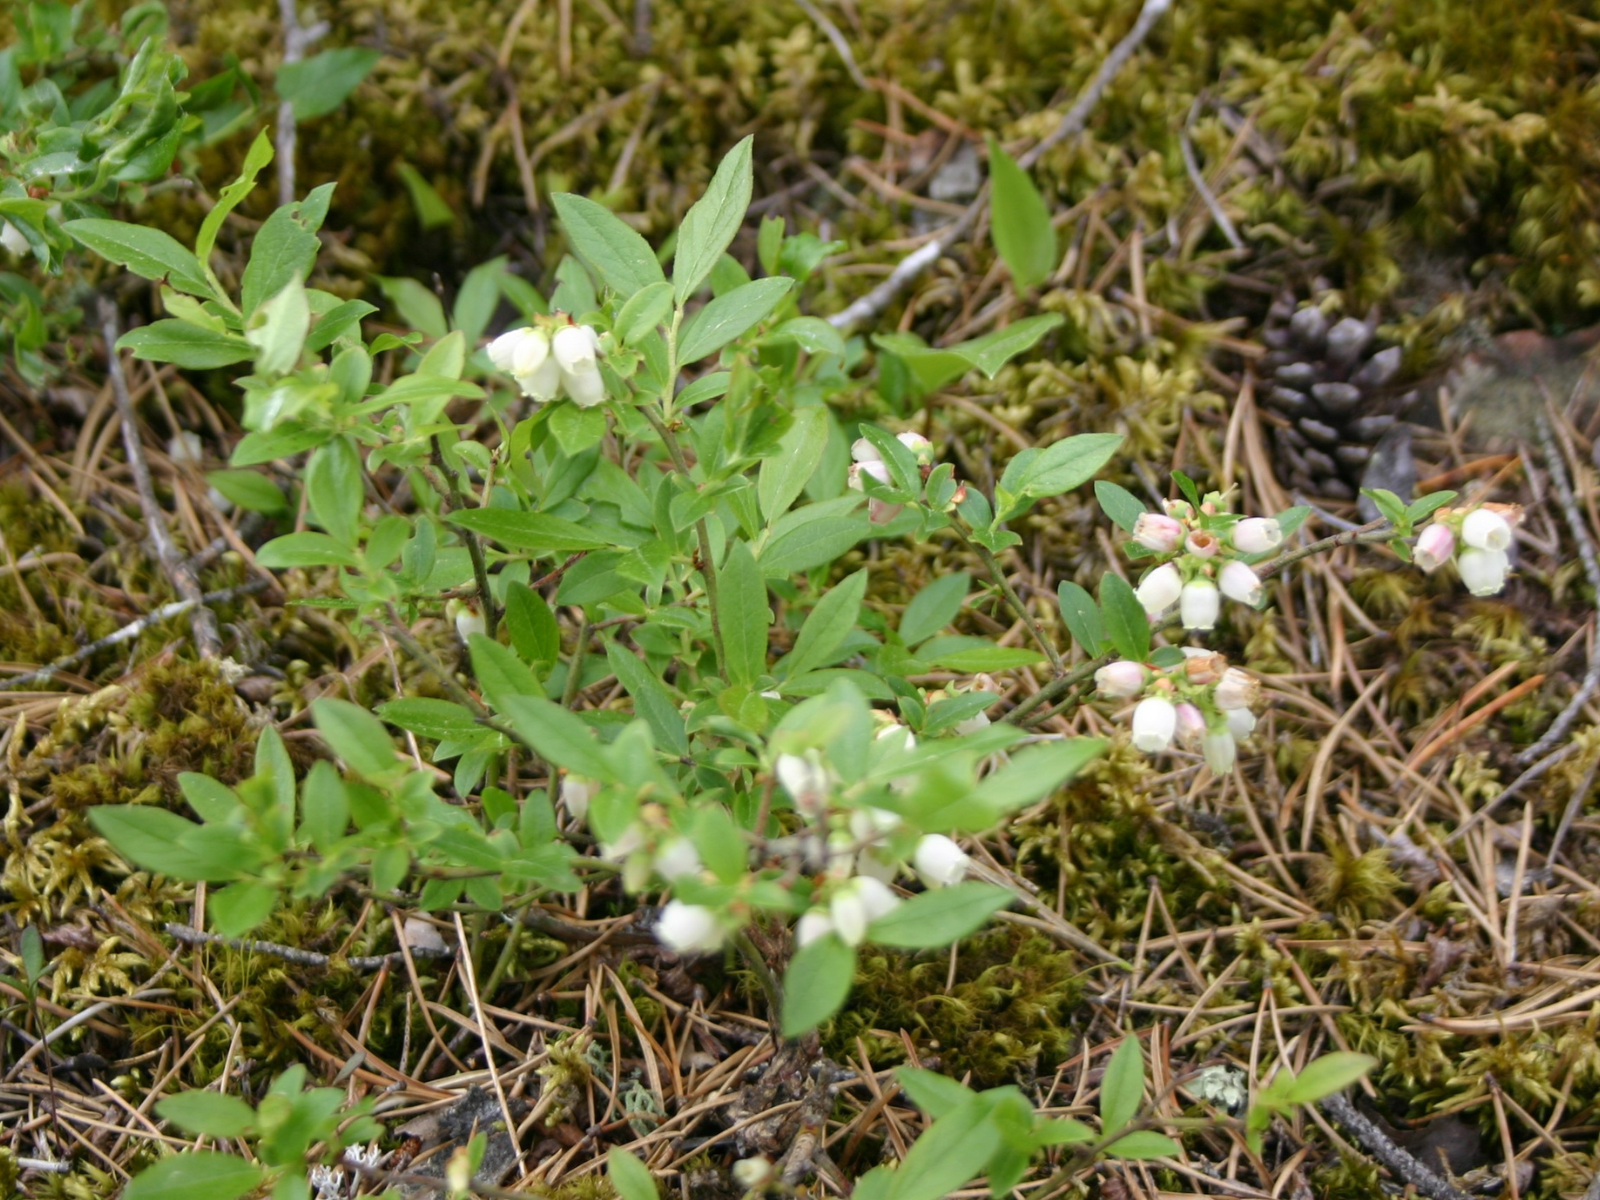 A low growing plant with small white flowers growing on it.